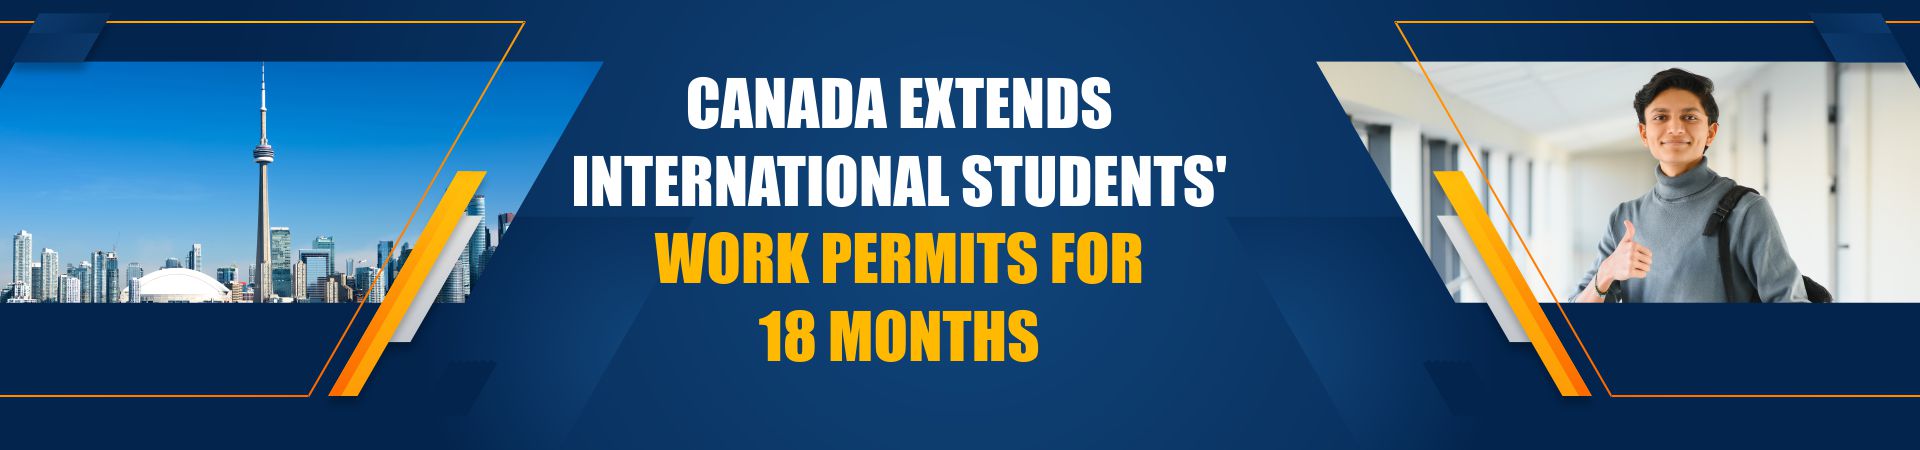 Canada extends international students' work permits for 18 months